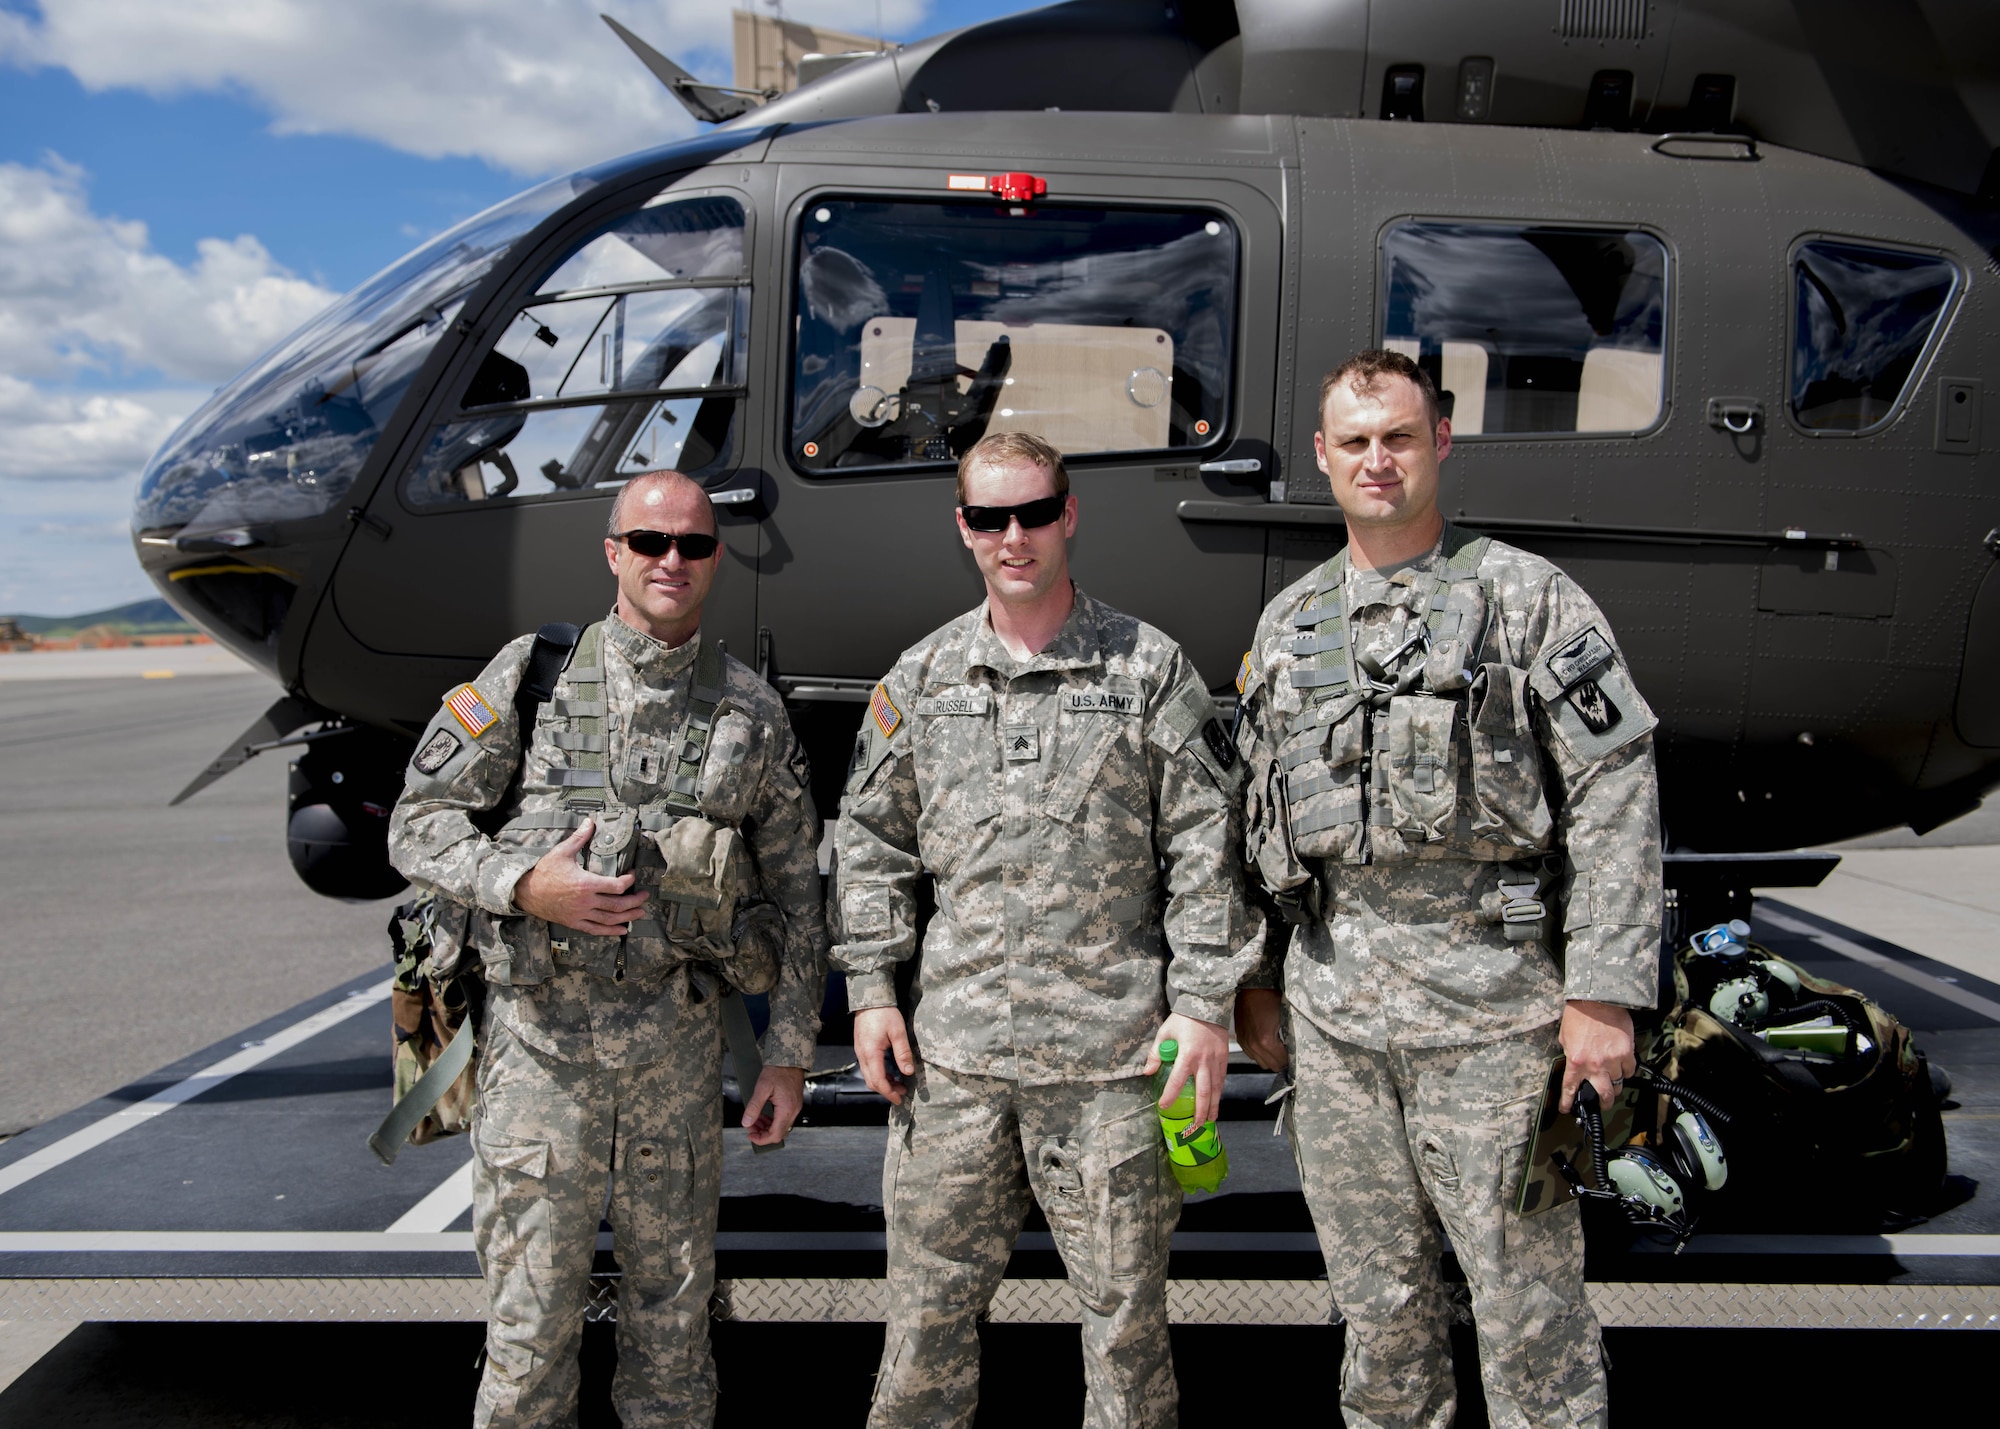 (from left to right) Chief Warrant Officer 3 Chris Haeder, Lakota pilot, Sgt. Darrell Russell, crew chief, and Chief Warrant Officer 2 Chris Mason, Lakota pilot of C Company, 1st Battalion, 112th Airborne Regiment, stand outside their helicopter June 14, 2017, at Fairchild Air Force Base, Washington. The National Guard 112th Airborne Regiment are a tenant unit at Fairchild.
(U.S. Air Force photo / Airman 1st Class Ryan Lackey)